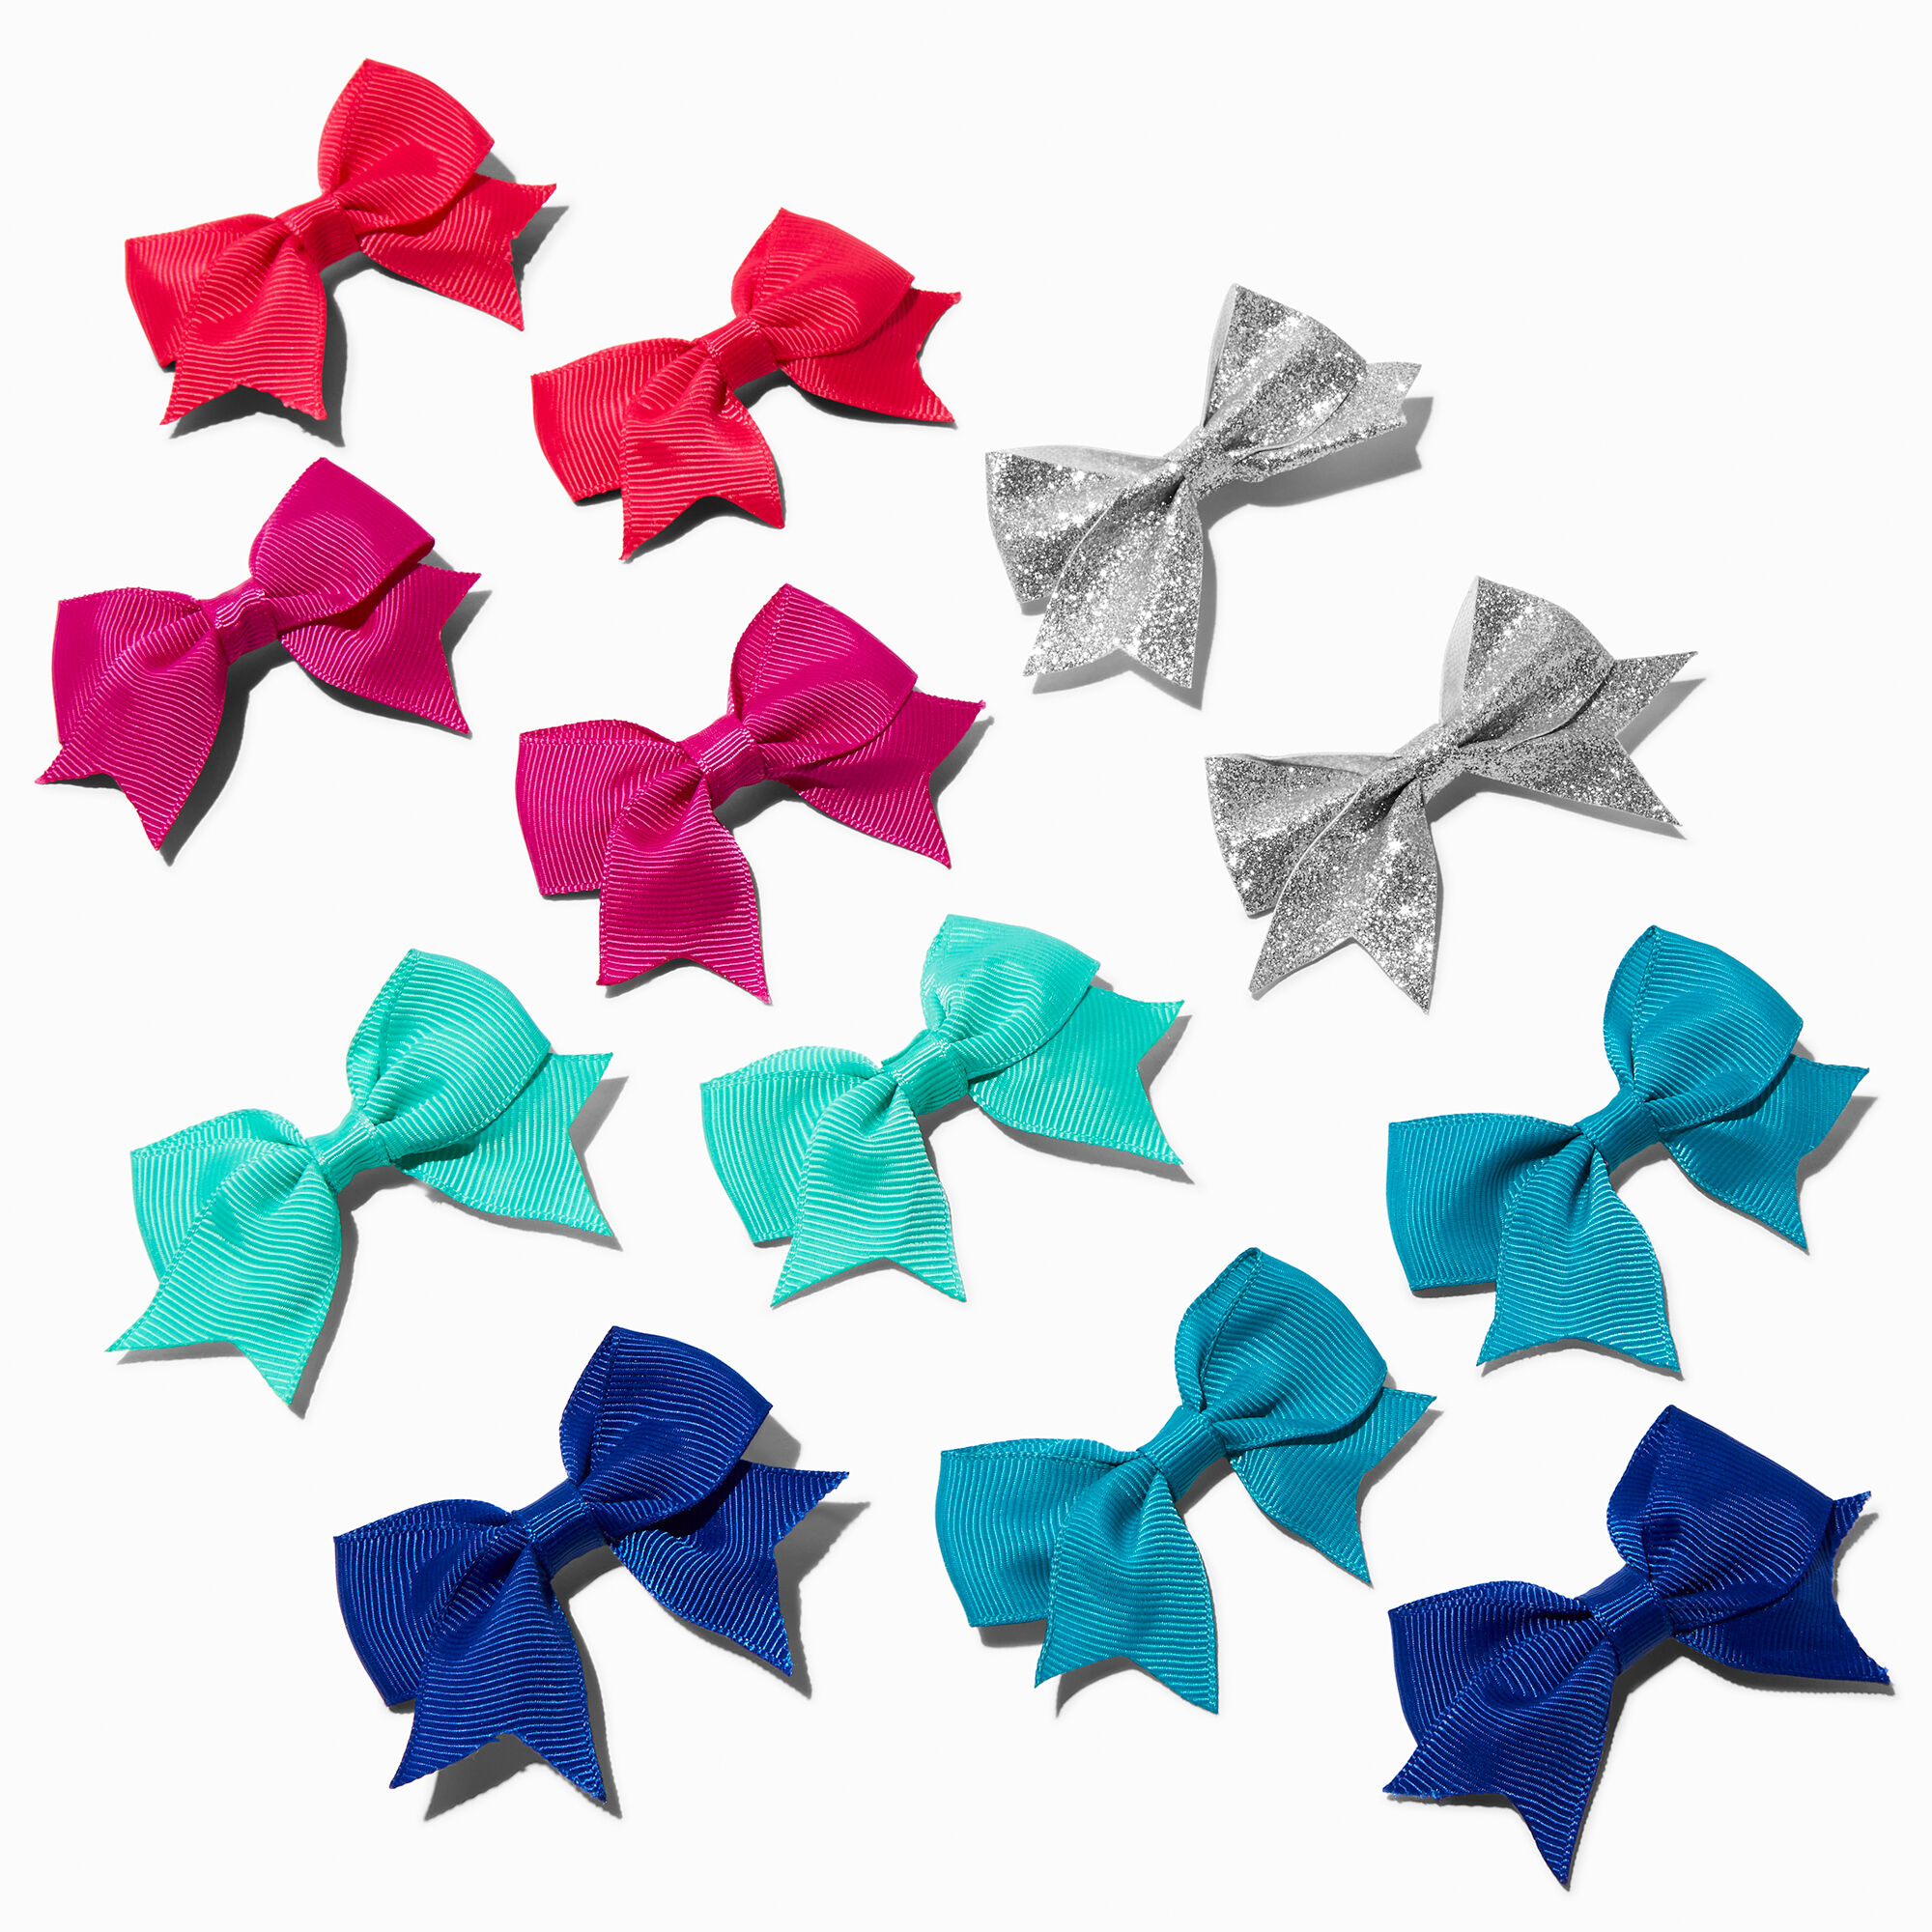 View Claires Club Jewel Tone Mini Hair Bow Clips 12 Pack information